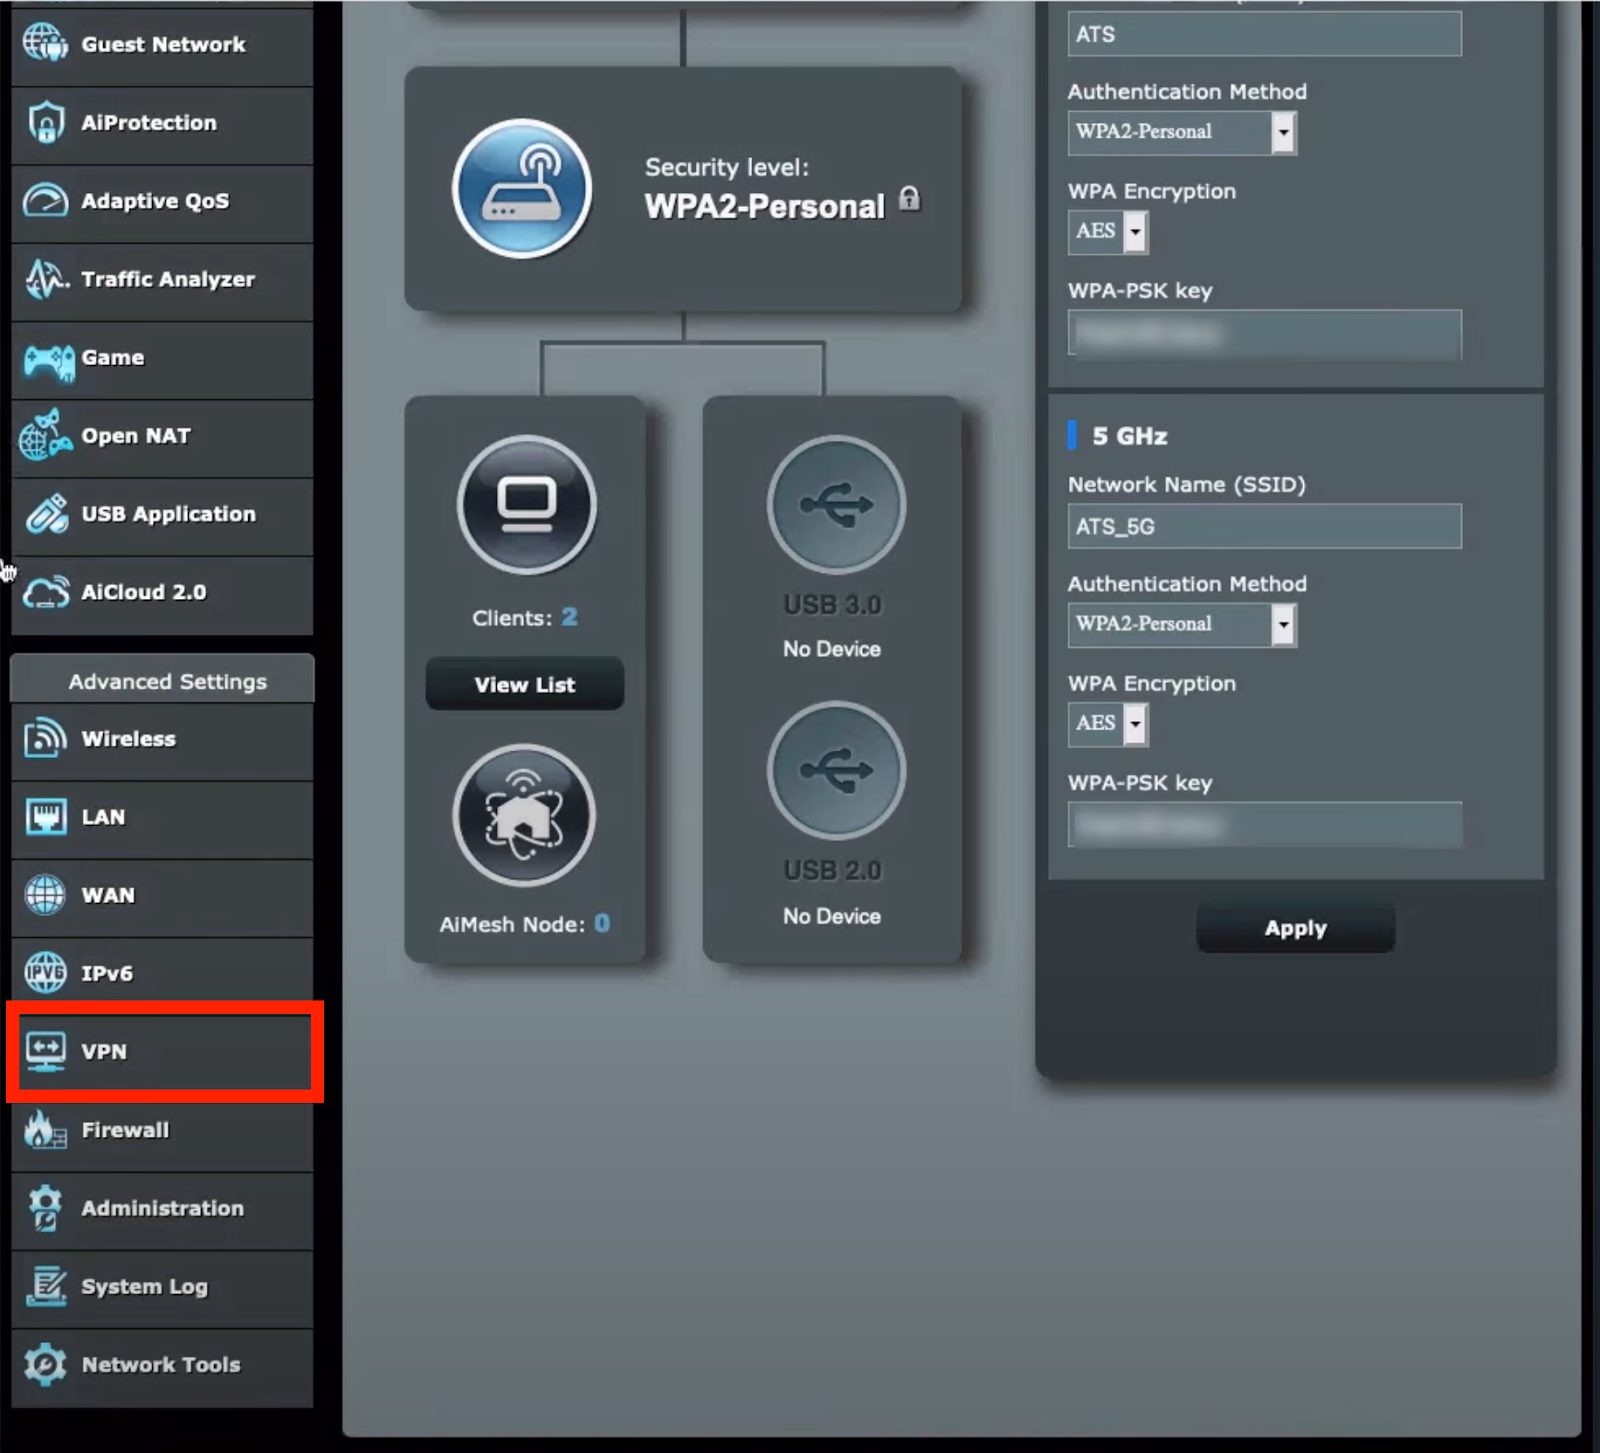 Screenshot of Asus Wi-Fi router configuration panel